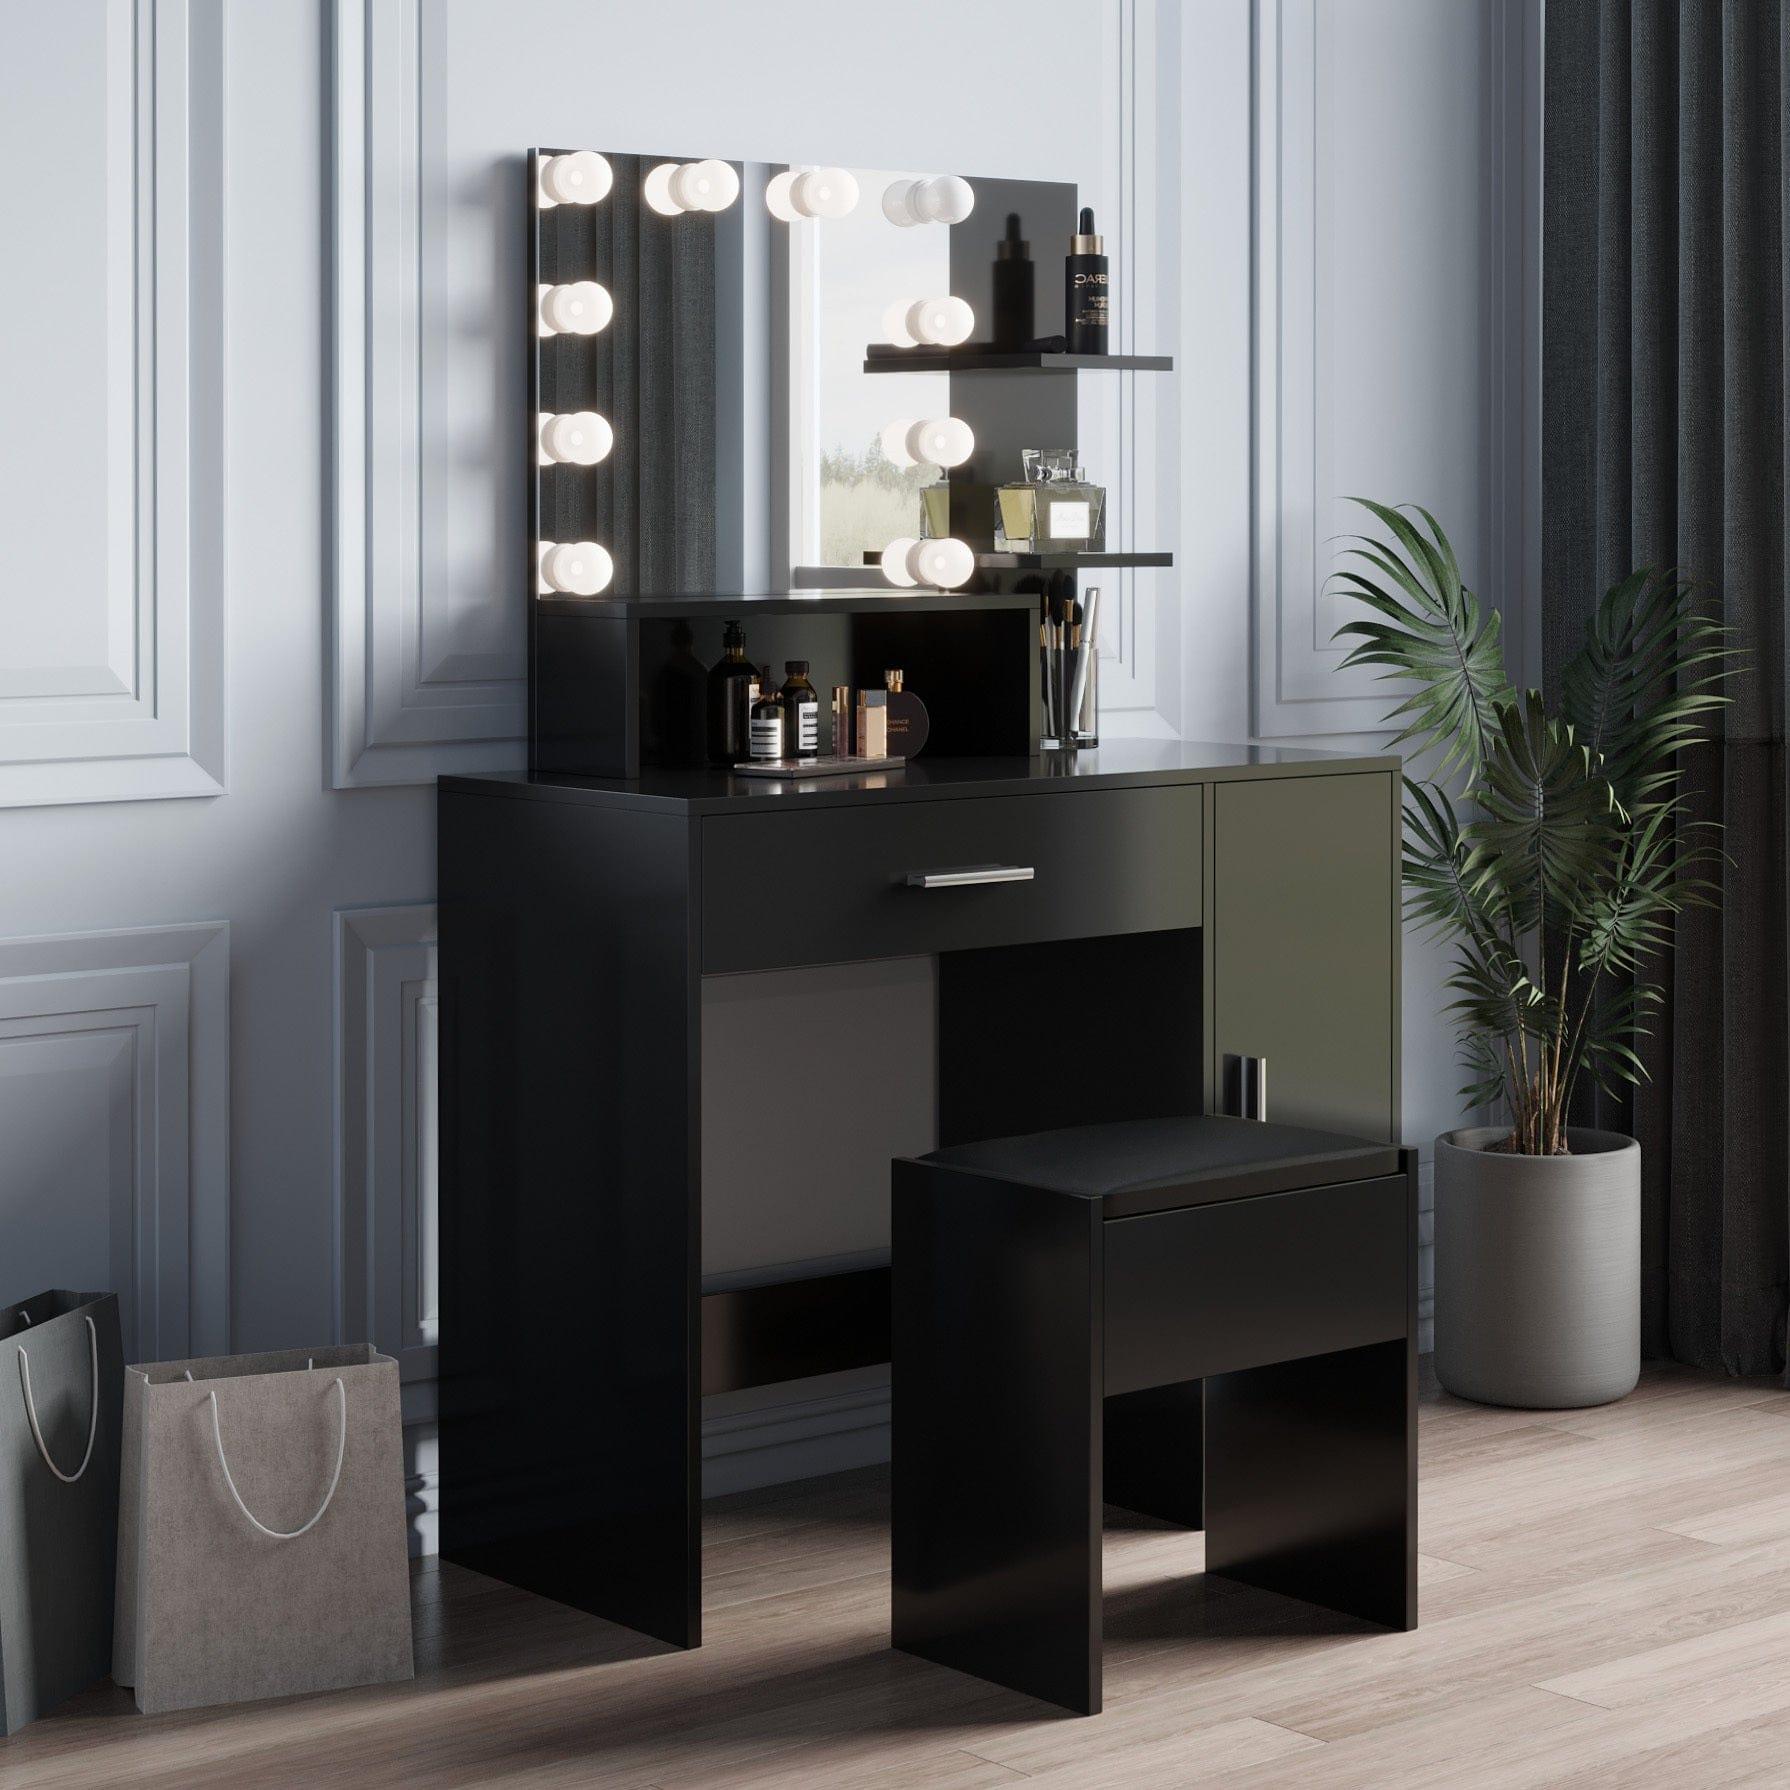 Shop Modern Dressing table with 1 Drawers, 1 cabinet，Rectangular Makeup Table with Mirror, Open Shelves ,35.43*15.75* 52.76inch,for Bedroom, Black Mademoiselle Home Decor